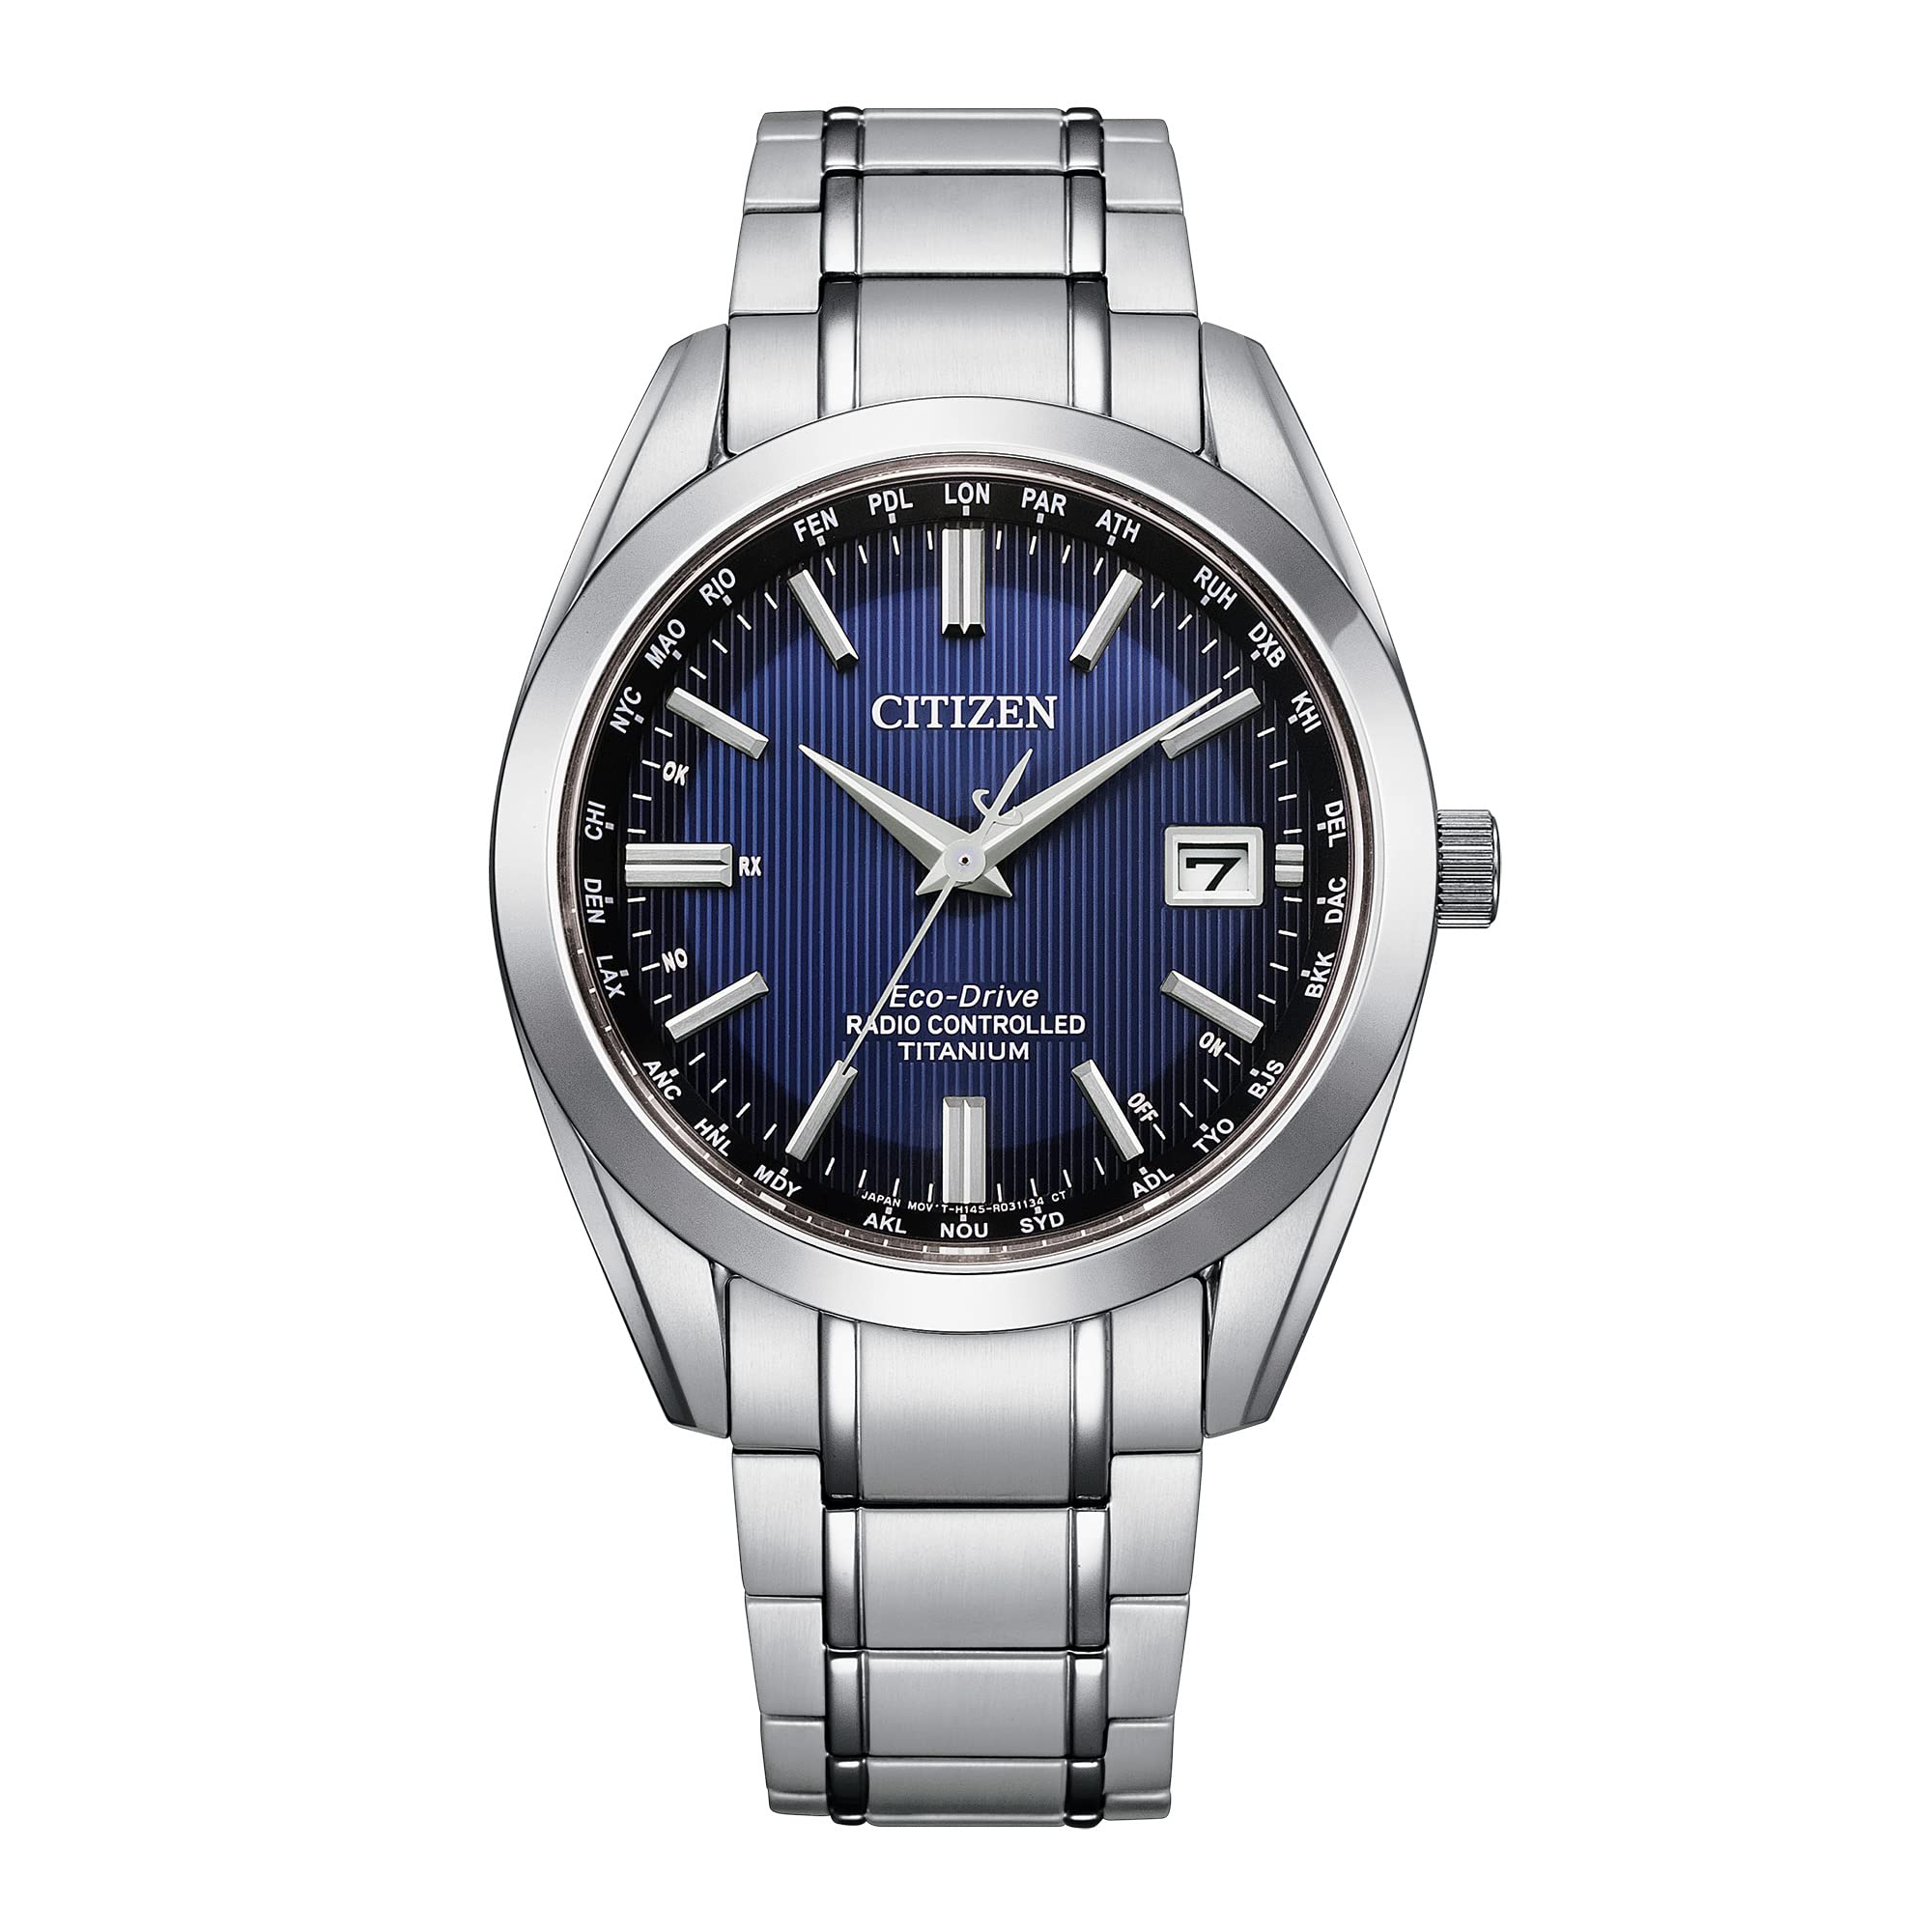 Citizen Men's Eco-Drive Classic Watch in Super Titanium™ with Atomic Timekeeping Technology, Blue Dial, 3-Hand Date and Sapphire Crystal (Model: CB0260-56L)